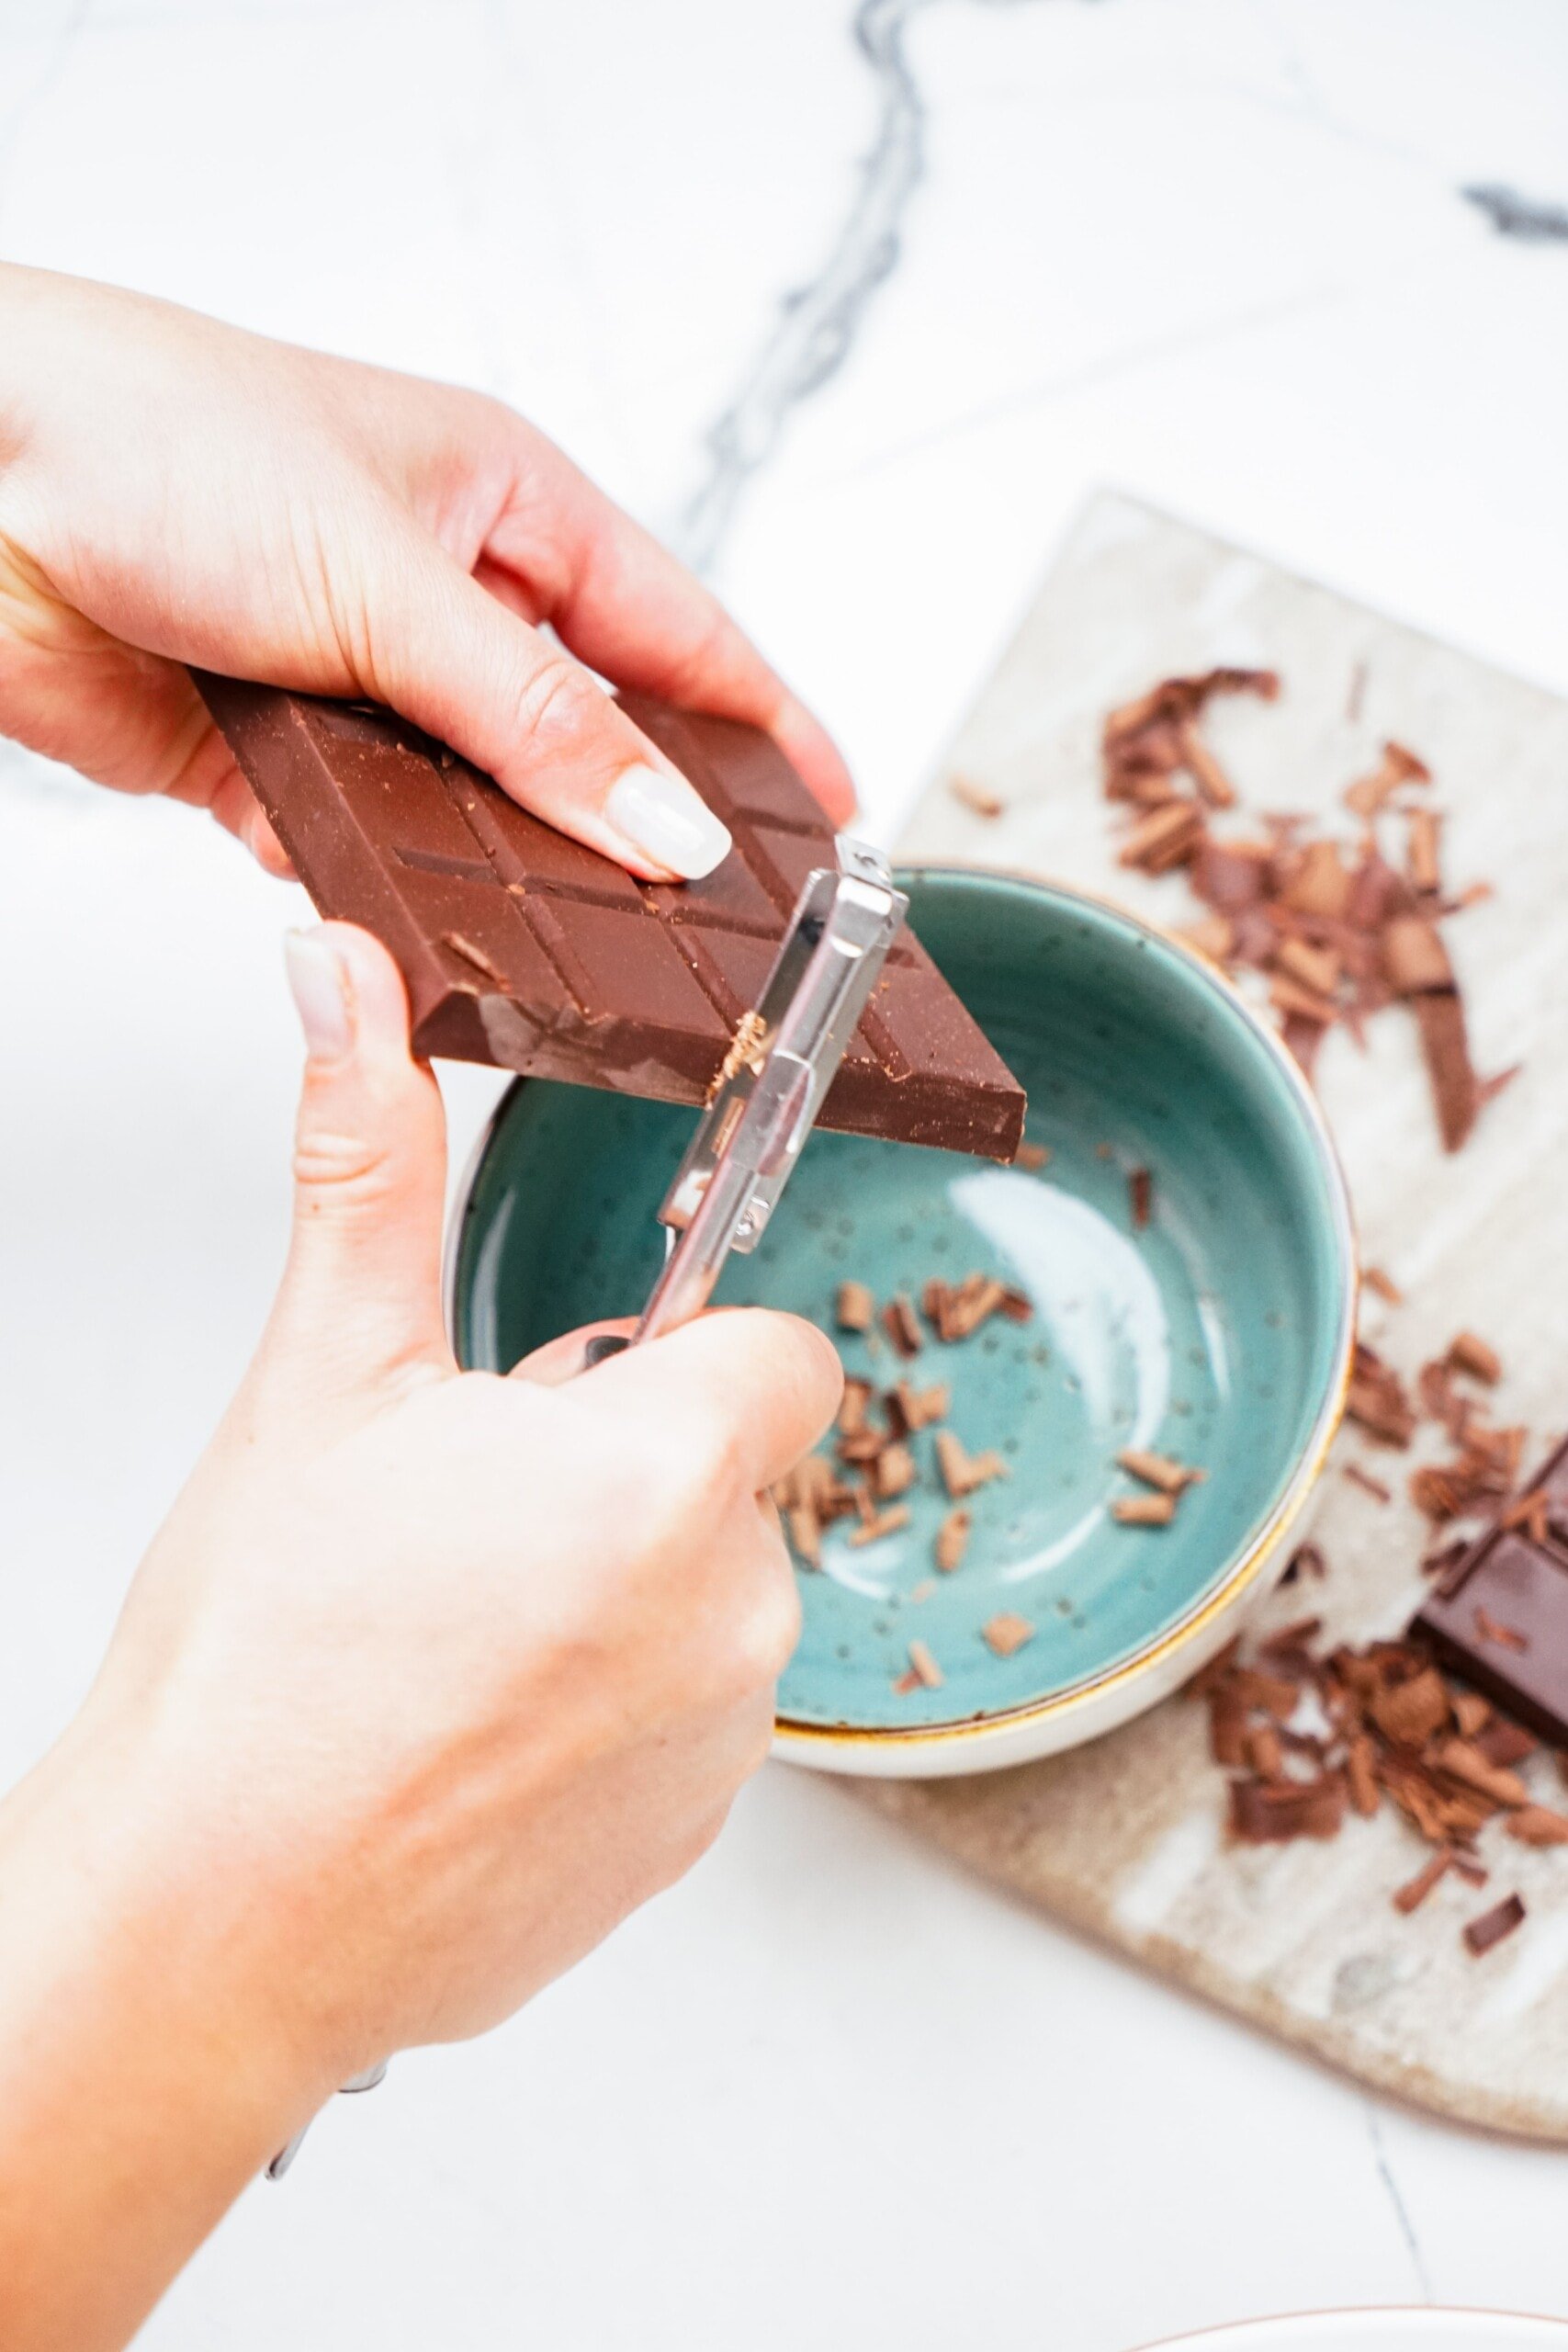 woman's hand using a veggie peeler to shave off a chocolate bar